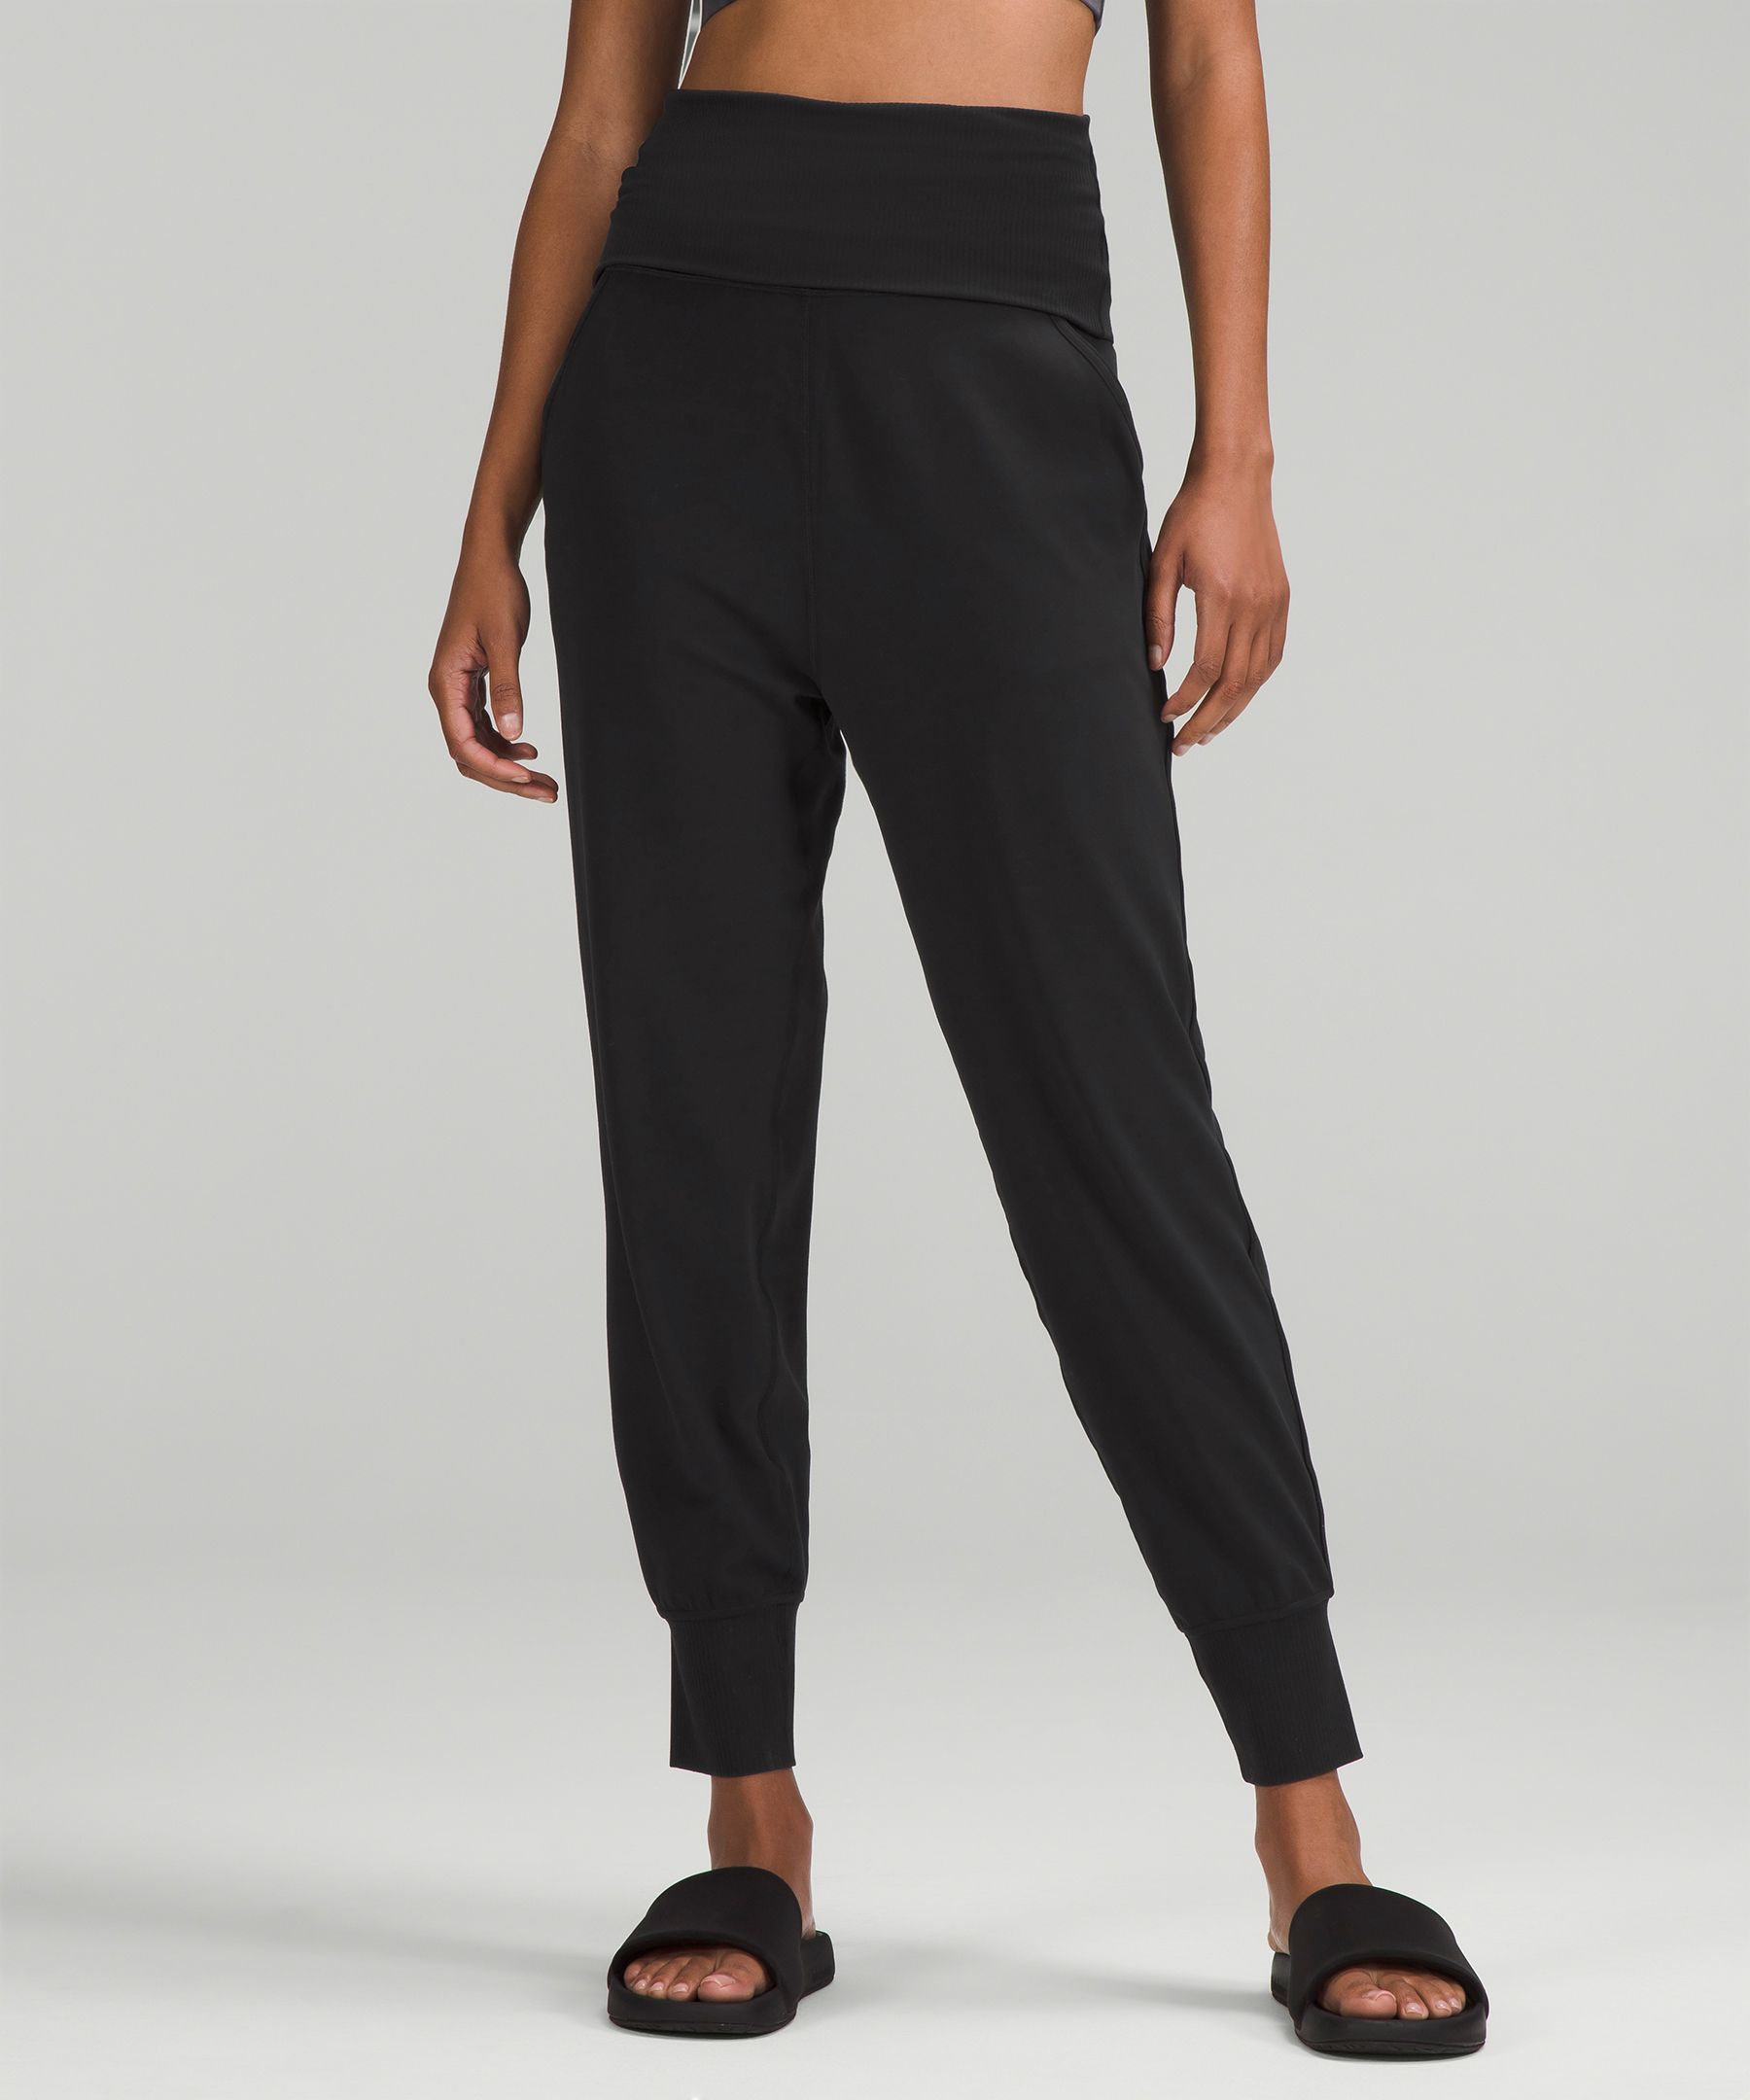 When feeling nothing is everything. lululemon align joggers